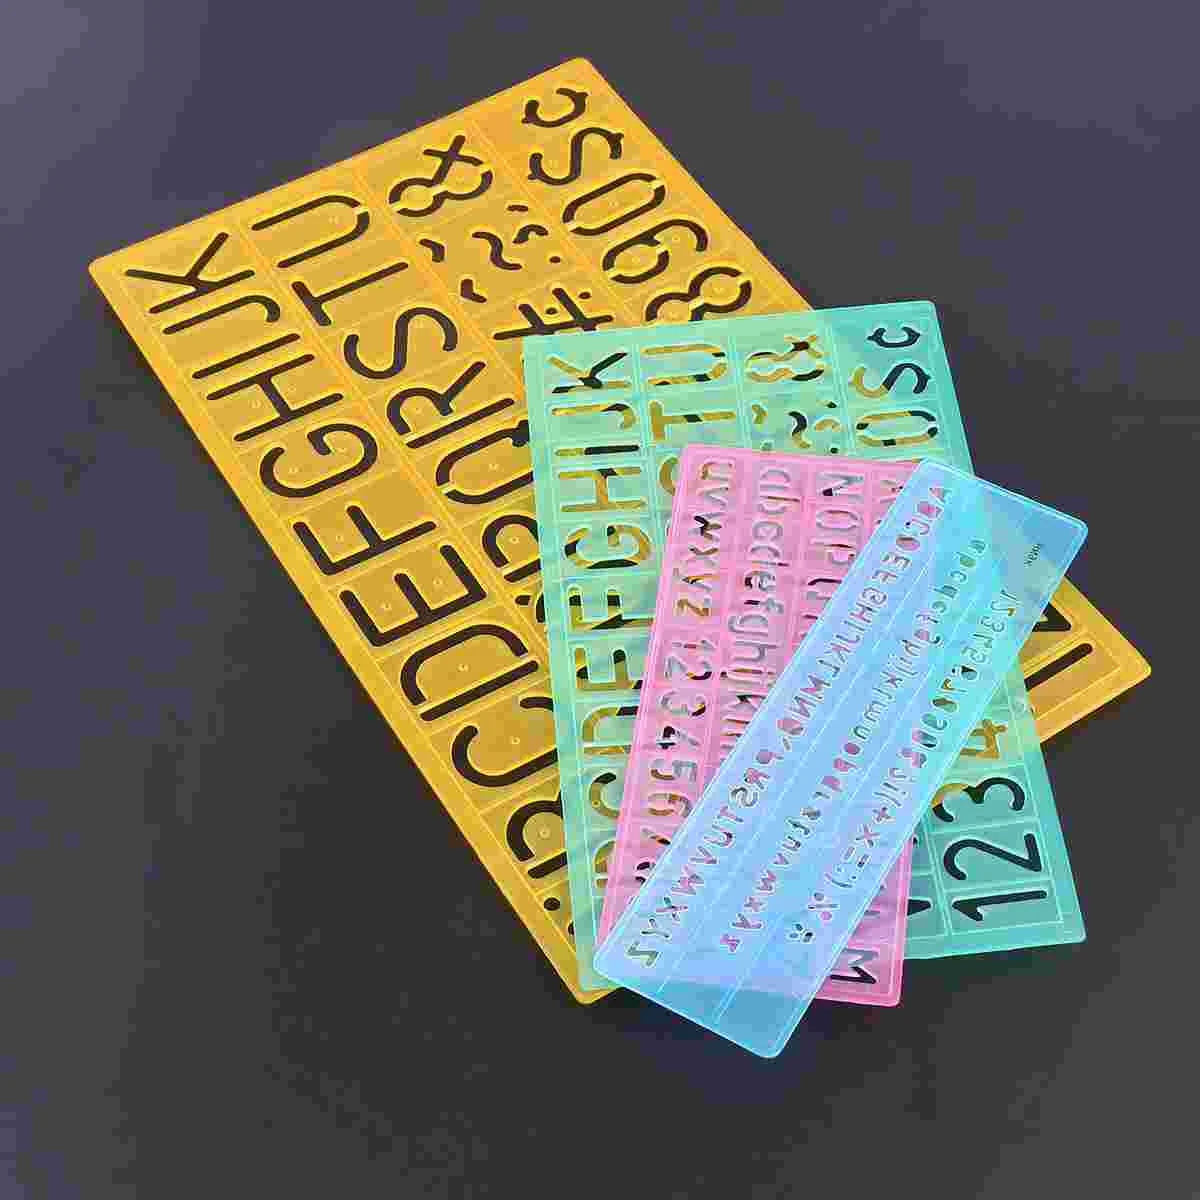 Stencil Rulers  Stencils Number Graffiti Letters Tool Learning Templates Drawingdecorative Crafts Letter Reusable Journal